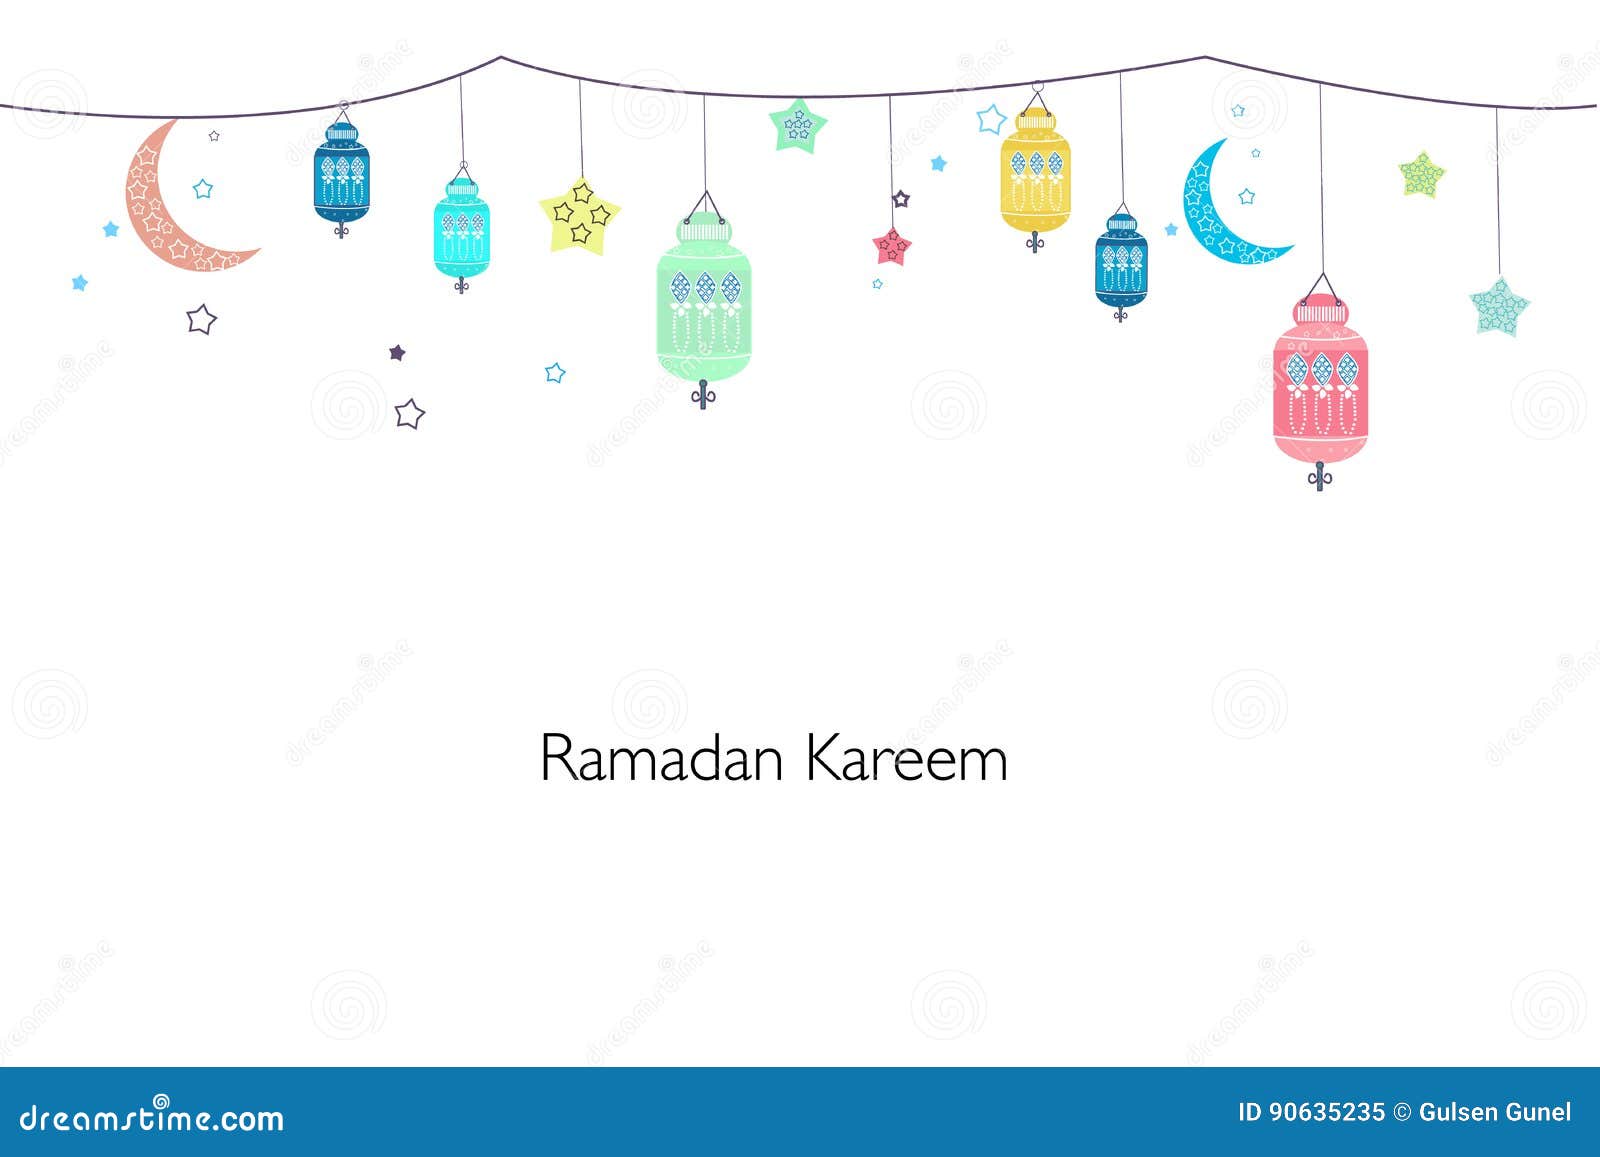 ramadan kareem with colorful lamps, crescents and stars. traditional black lantern of ramadan background